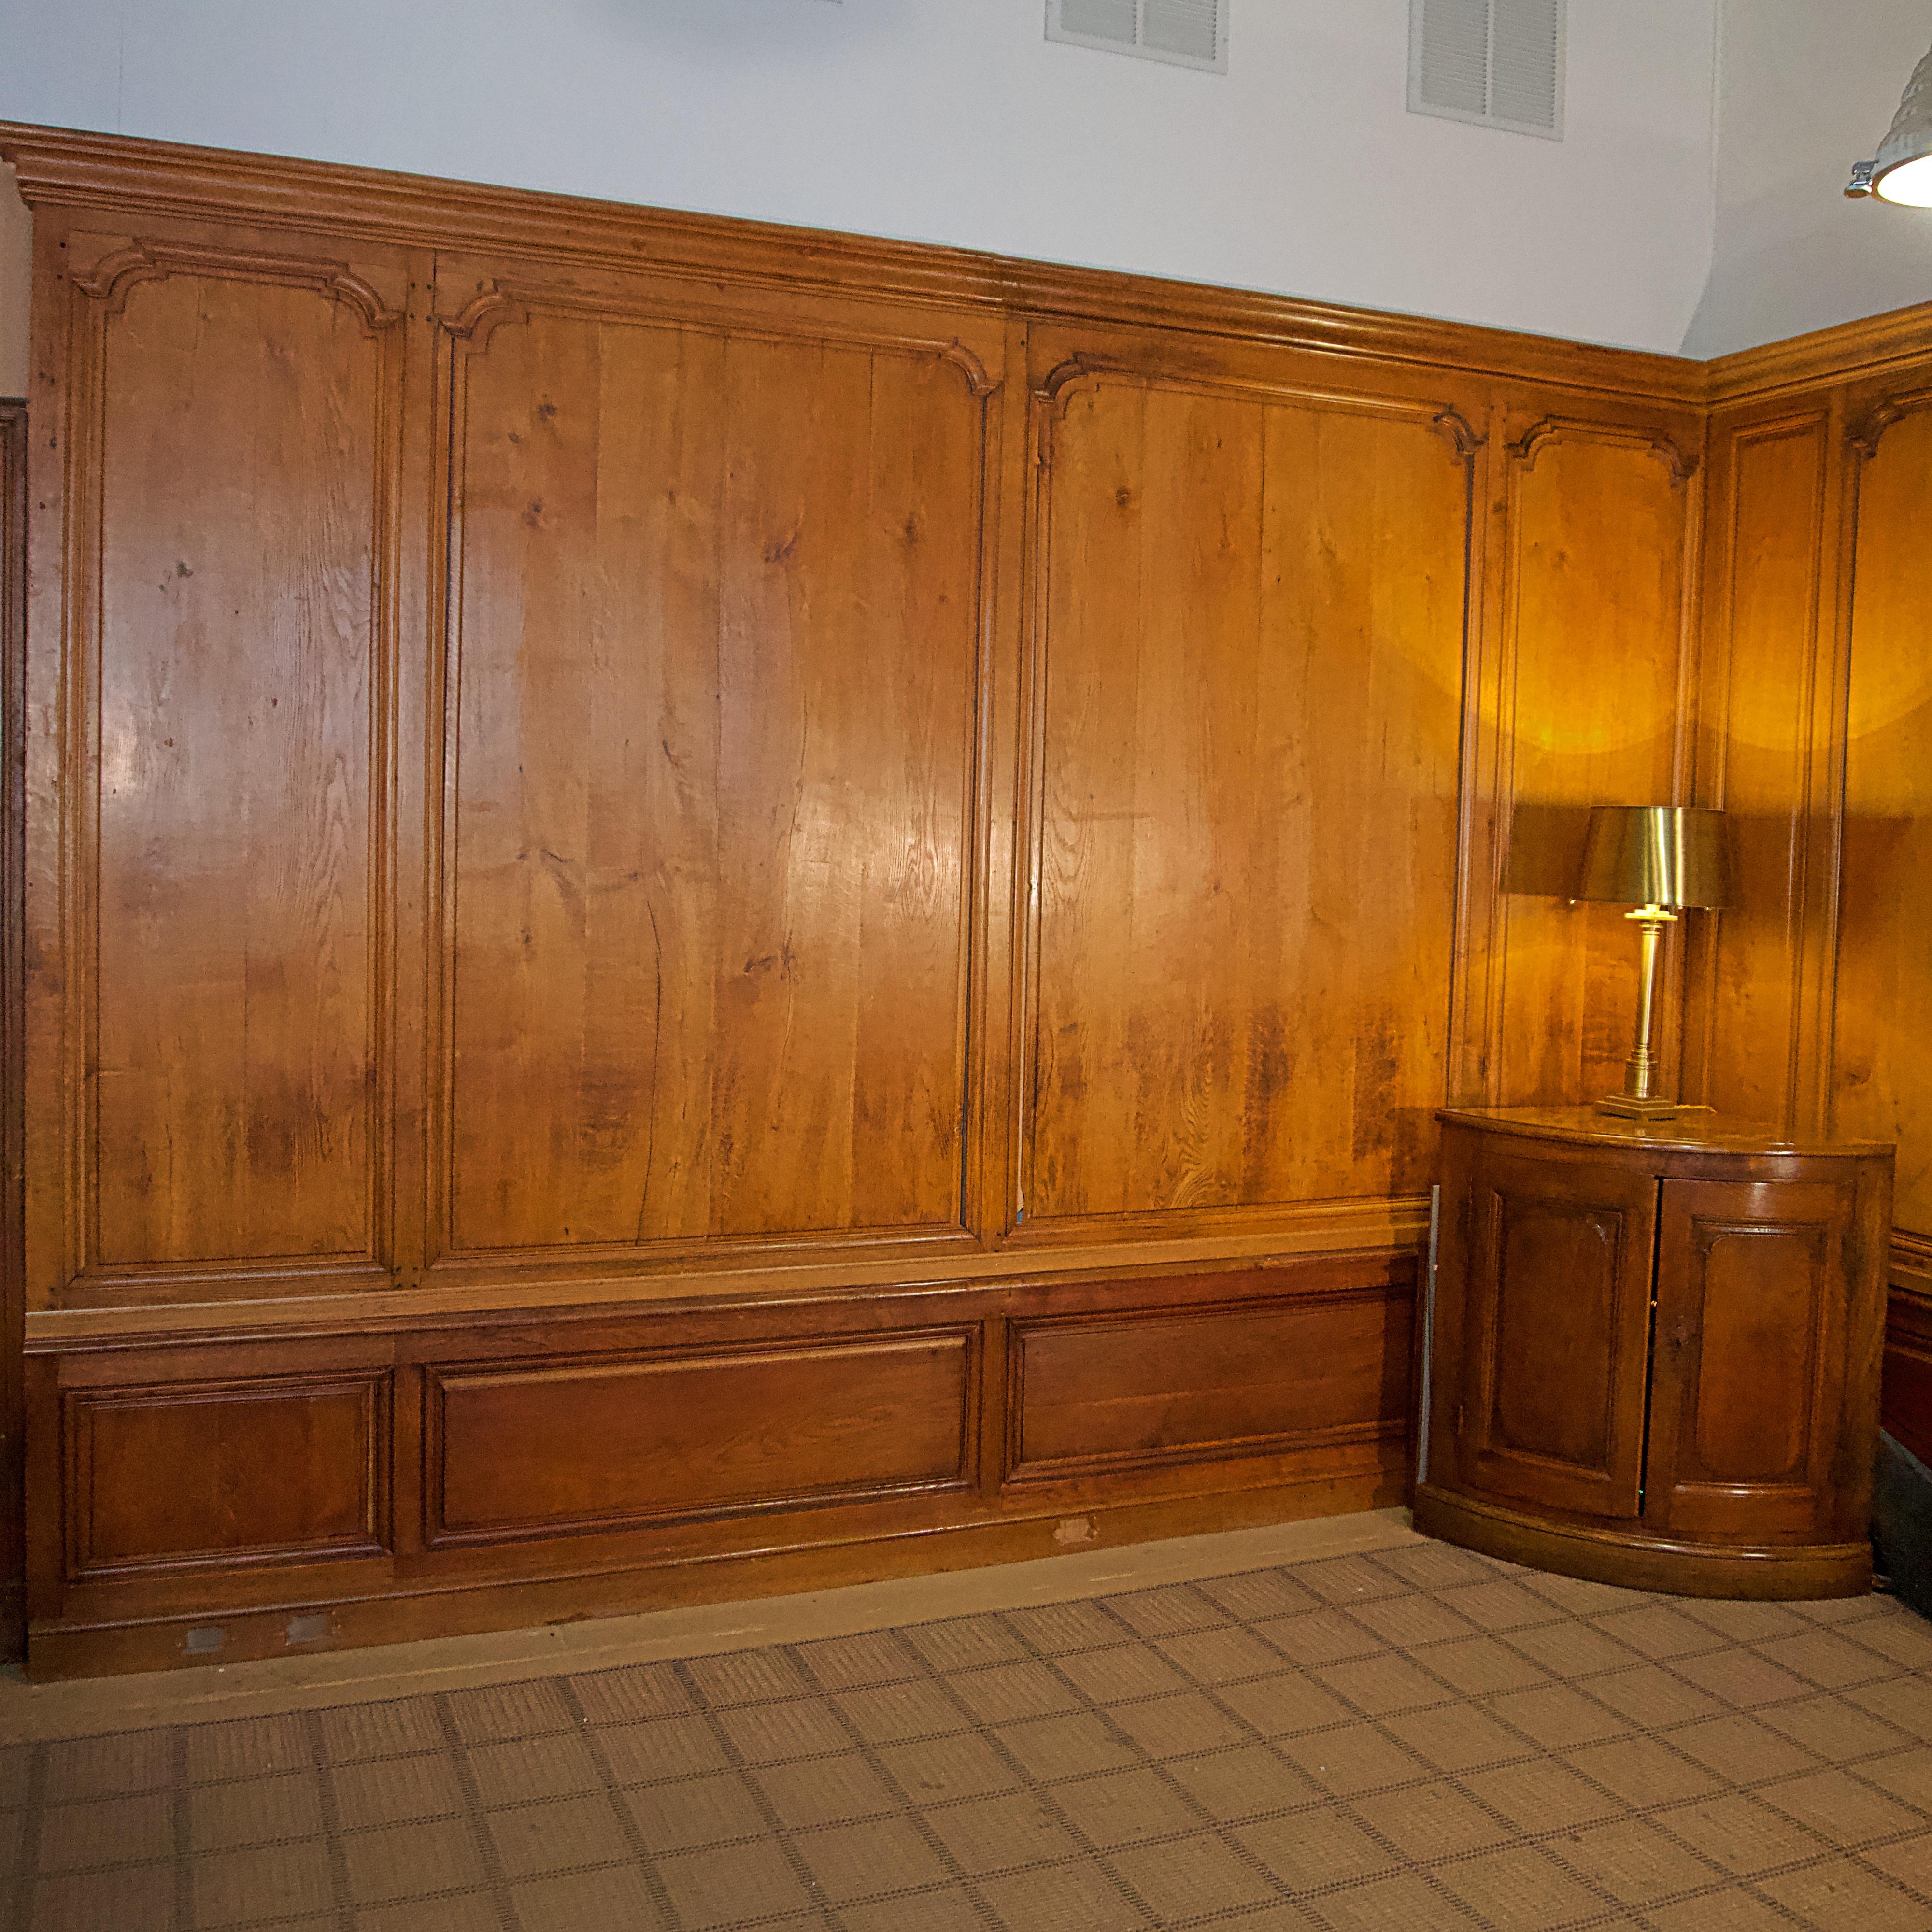 Late 17th century oak paneled room 3 walls, 2 doors.
Exceptional faded oak color and patina. Would make a great office
or dressing room. We can build additions and install to suit you needs.

(Lower wall panels and some moldings of a later date).